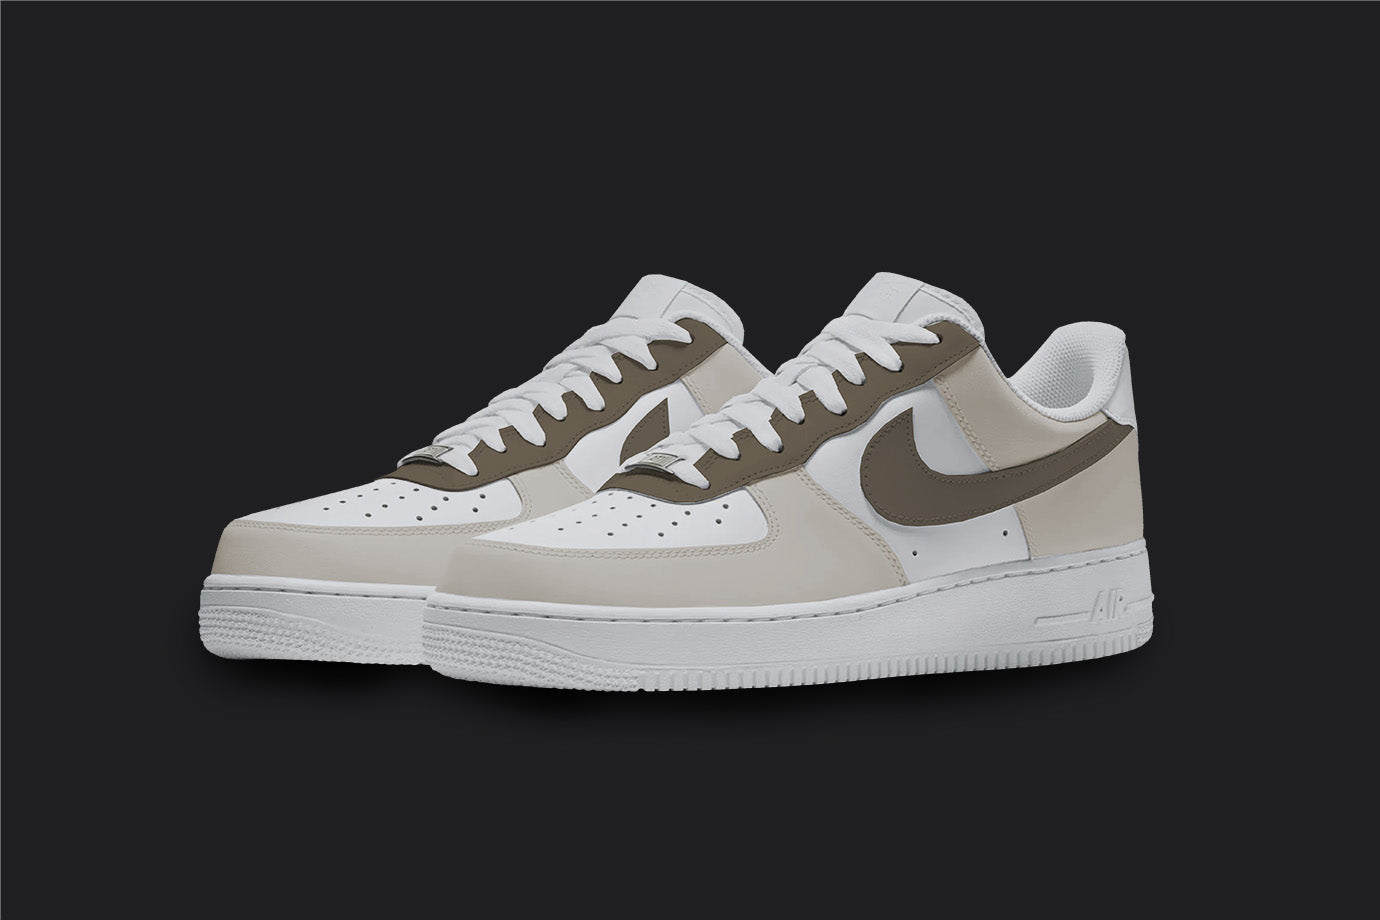 The image is of a Custom Nike Air force 1 sneaker pair on a blank black background. The white custom sneakers have different brown tones on the sneaker